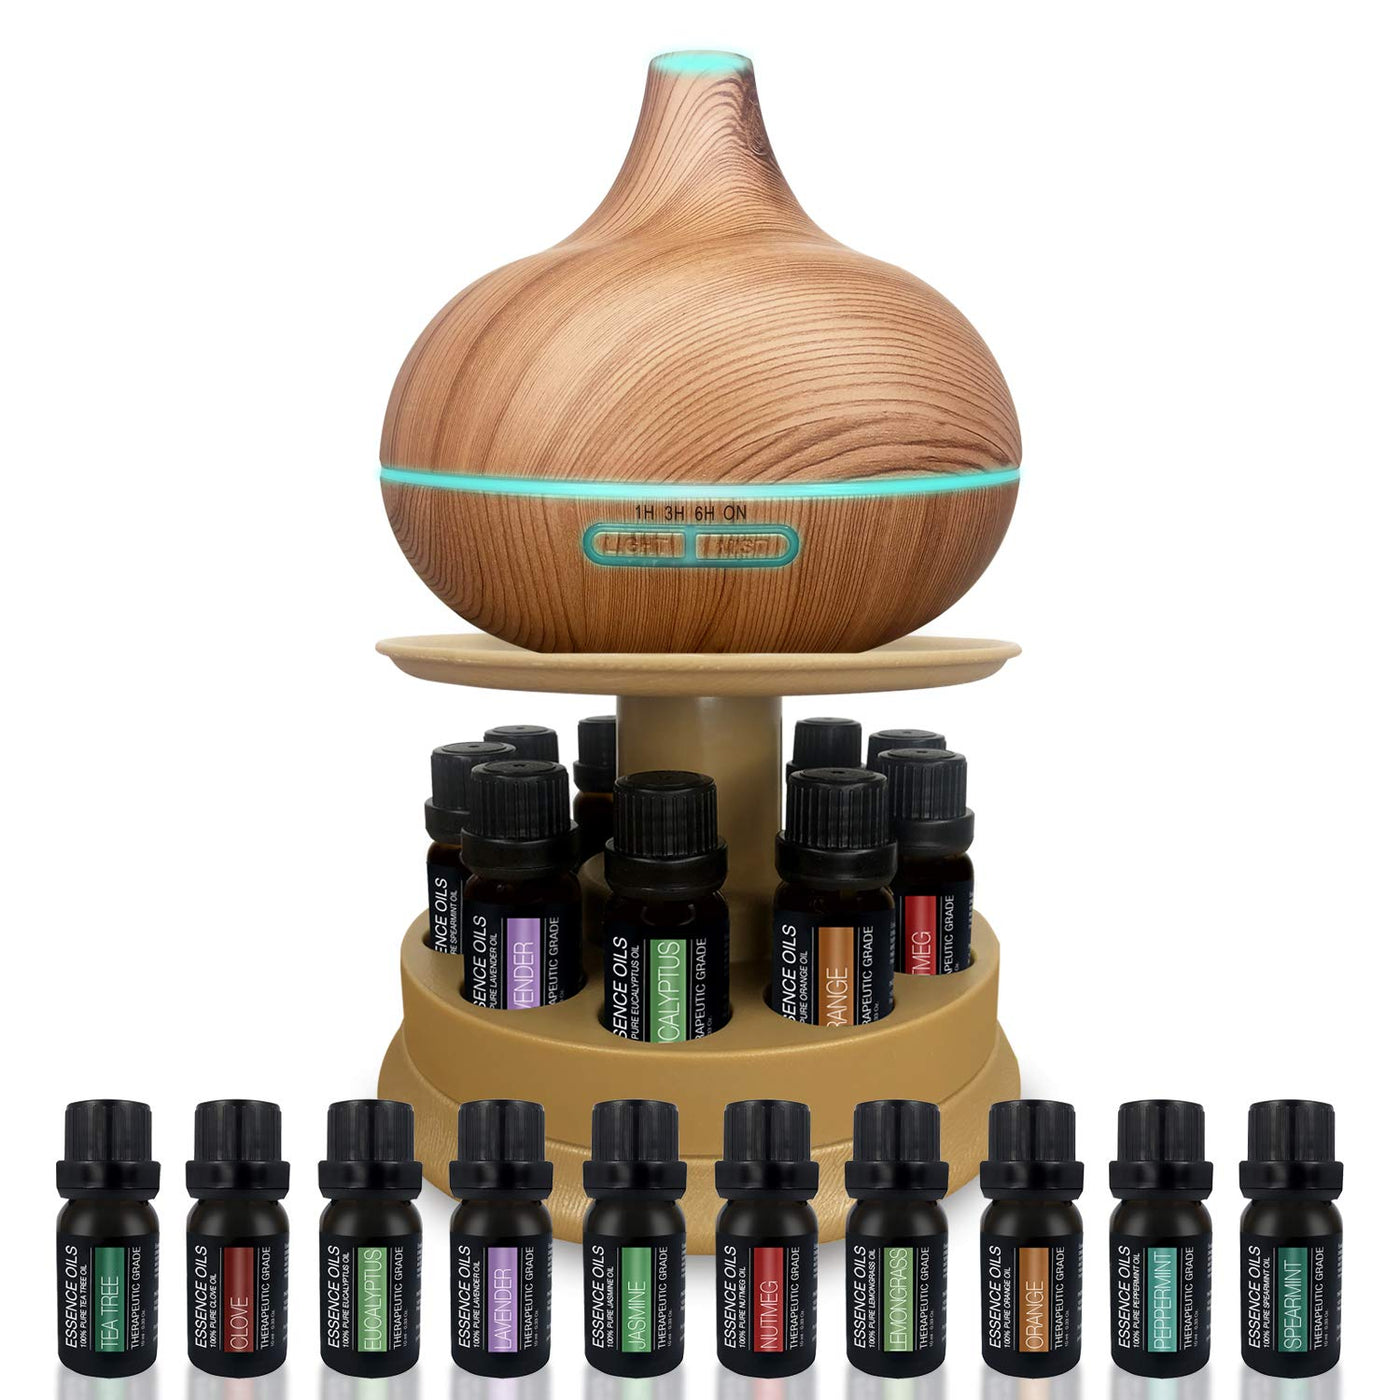 PURE DAILY CARE Waterless Essential Oil Diffuser Set - ShopStyle